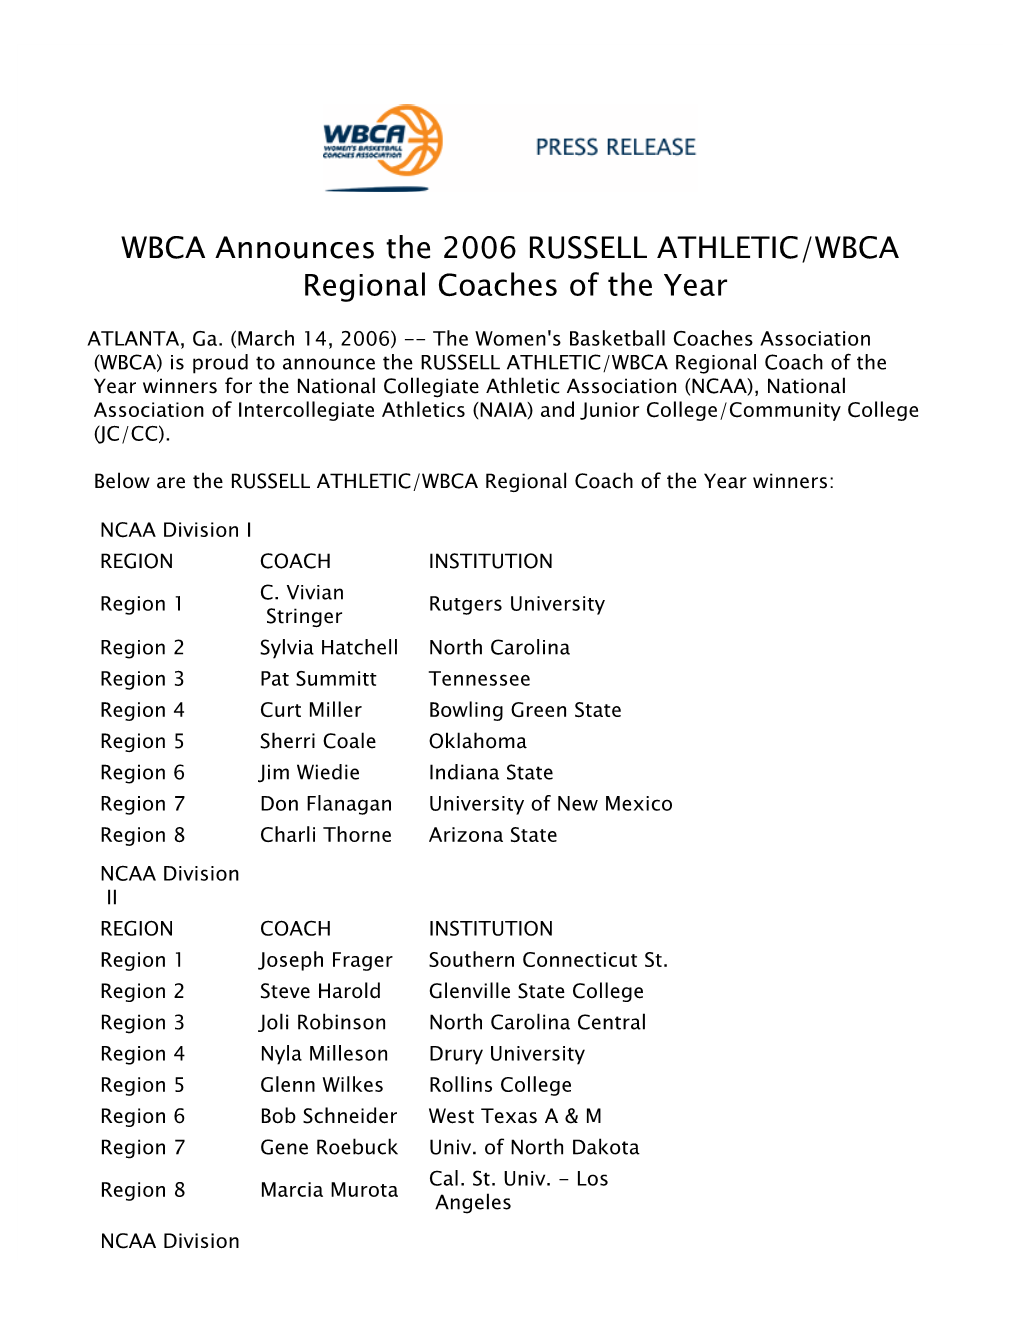 WBCA Announces the 2006 RUSSELL ATHLETIC/WBCA Regional Coaches of the Year